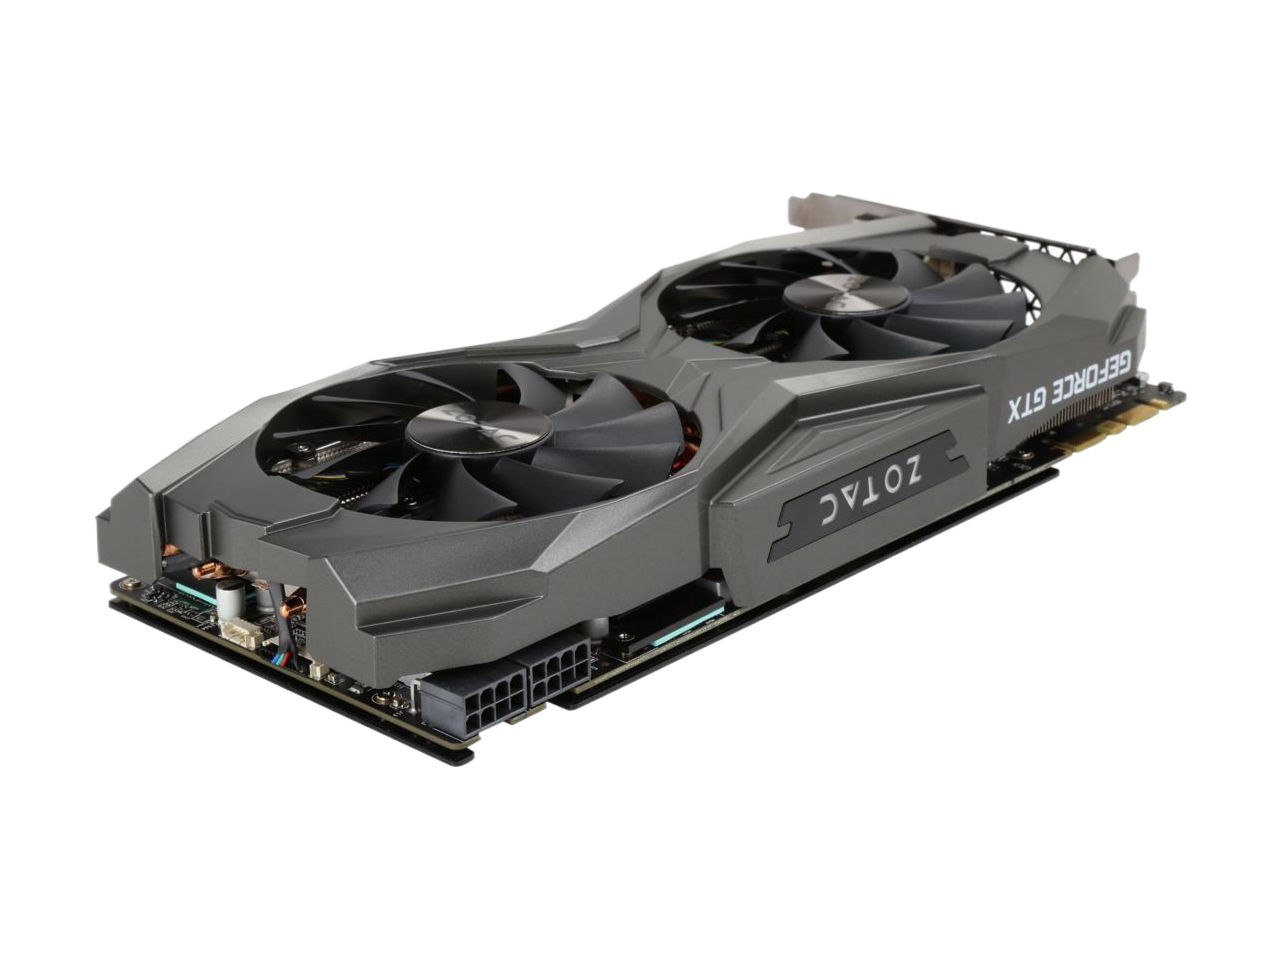 ZOTAC GeForce GTX 1080 Ti AMP Edition 11GB GDDR5X 352-bit Gaming Graphics Card VR Ready 16+2 Power Phase Freeze Fan Stop IceStorm Cooling Spectra Lighting ZT-P10810D-10P